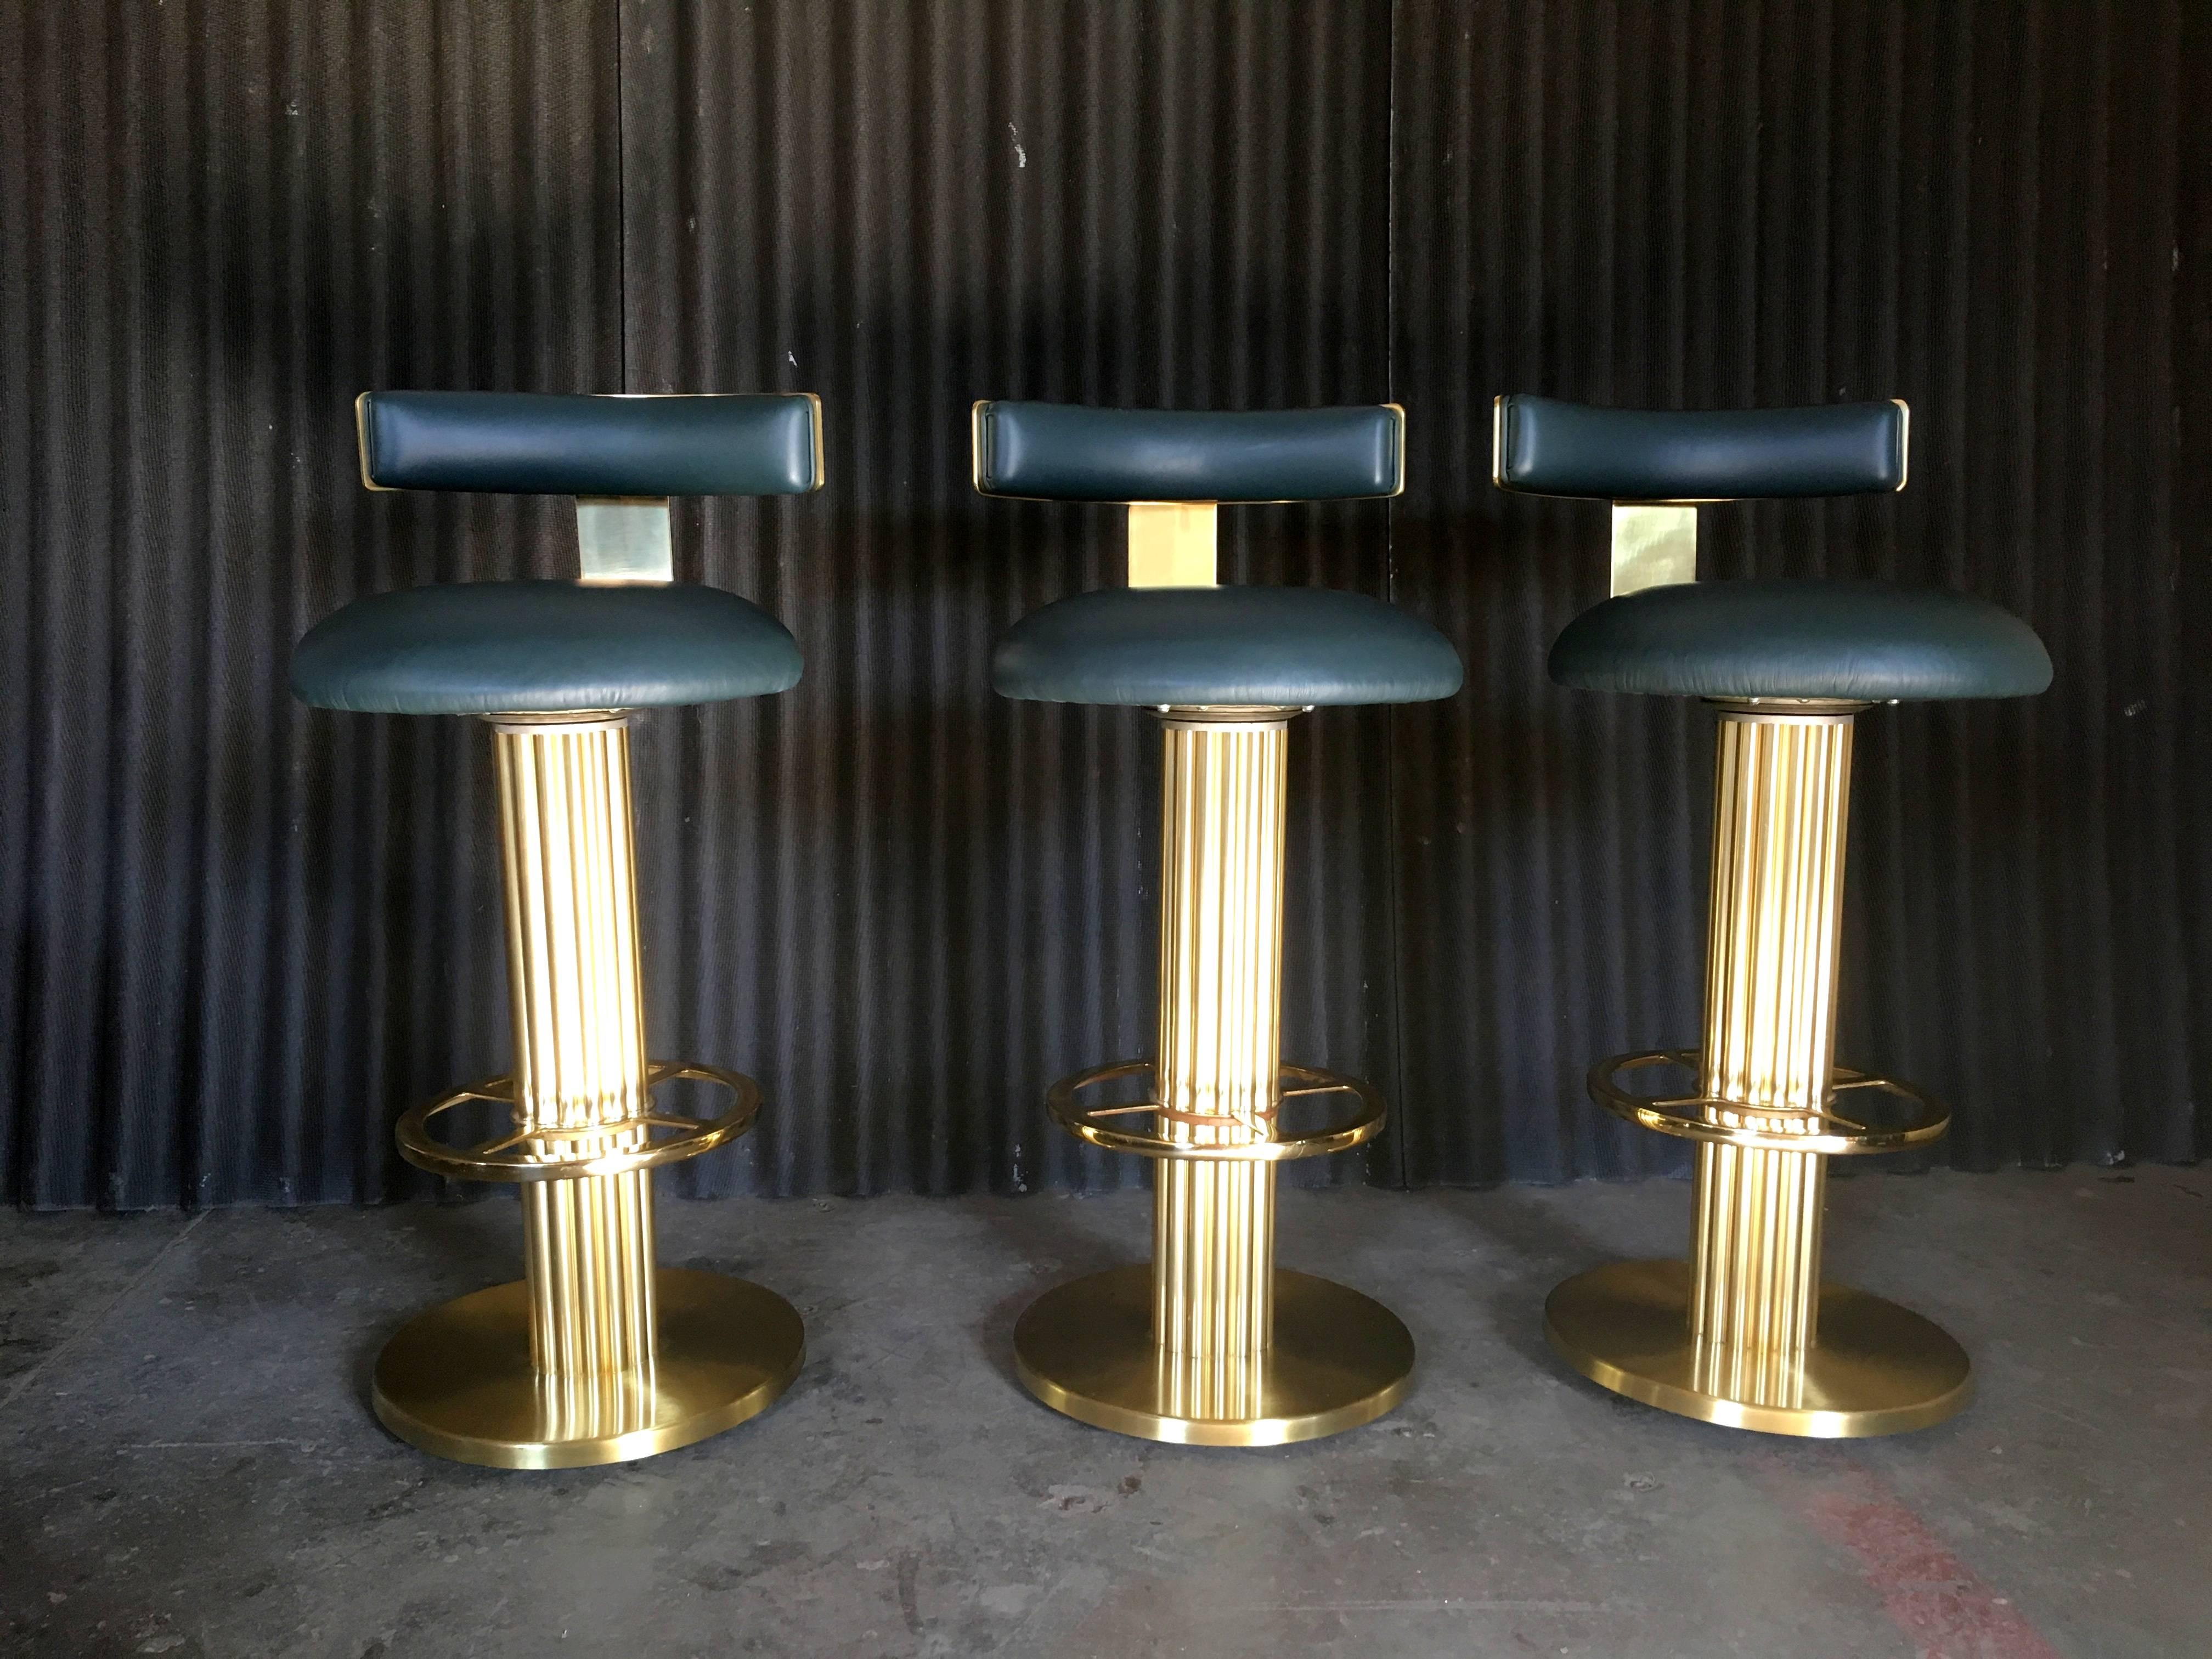 You will not find a more gorgeous set of brass-plated design for Leisure bar stools out there. These pretty babies are near perfection!
No rips or holes in the blue/green leather and only slight marks on the brass as shown in the two photos. Other